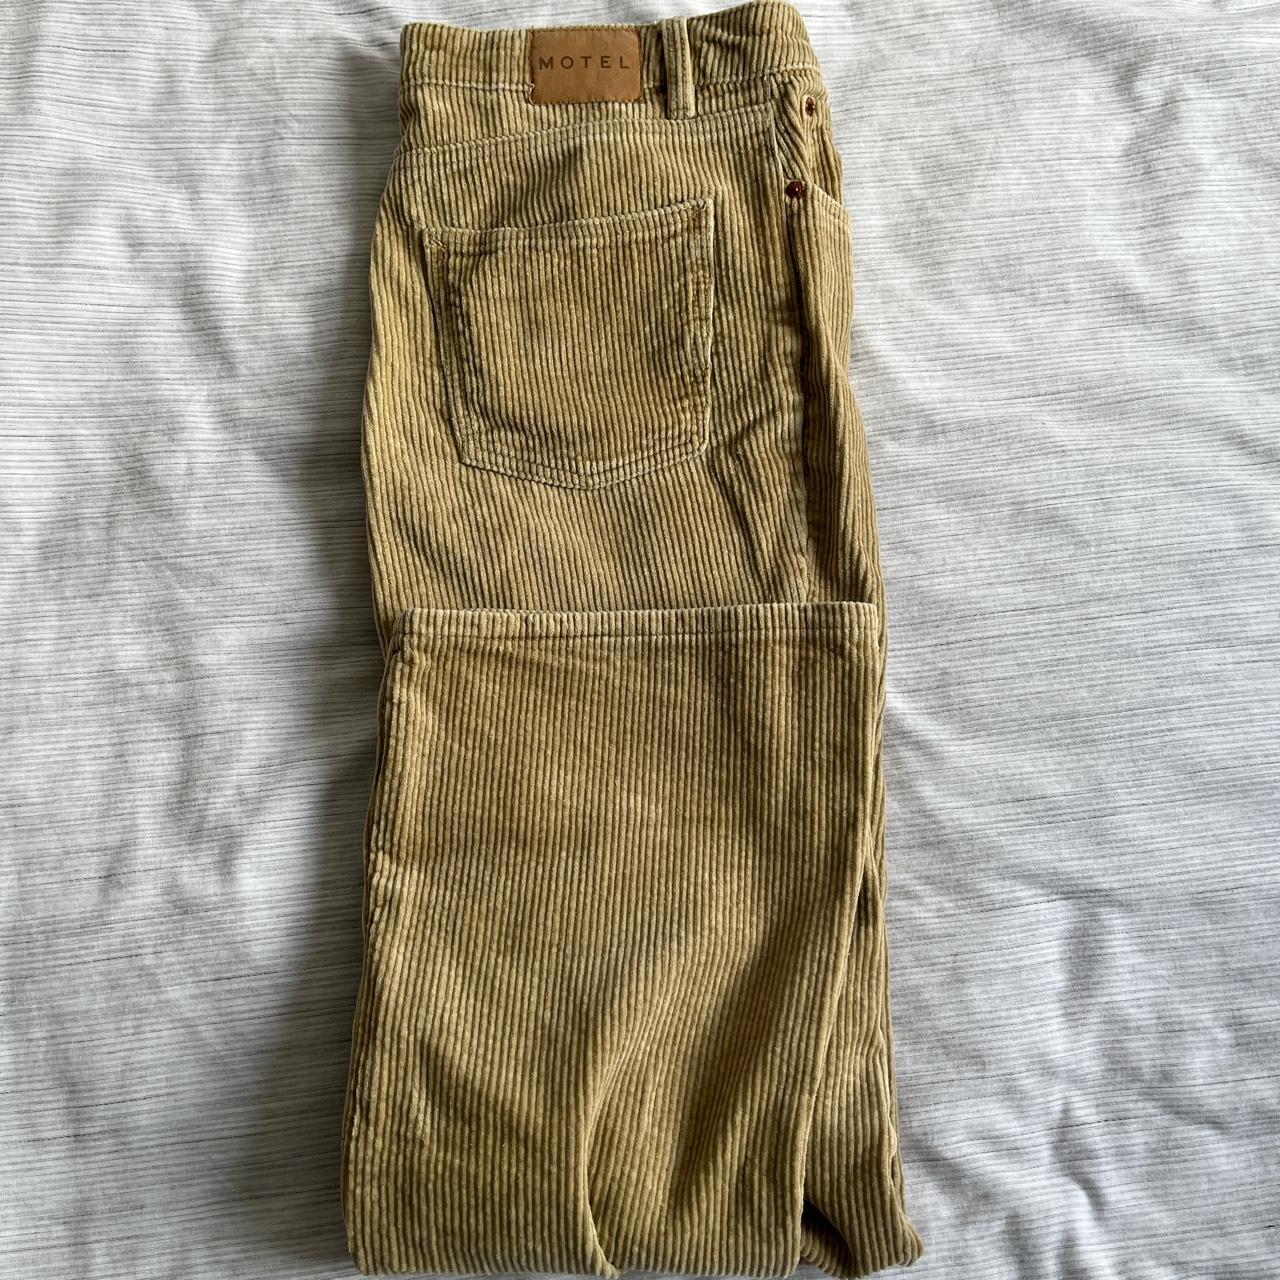 Beige/sand cord flares from motel Size S but to... - Depop